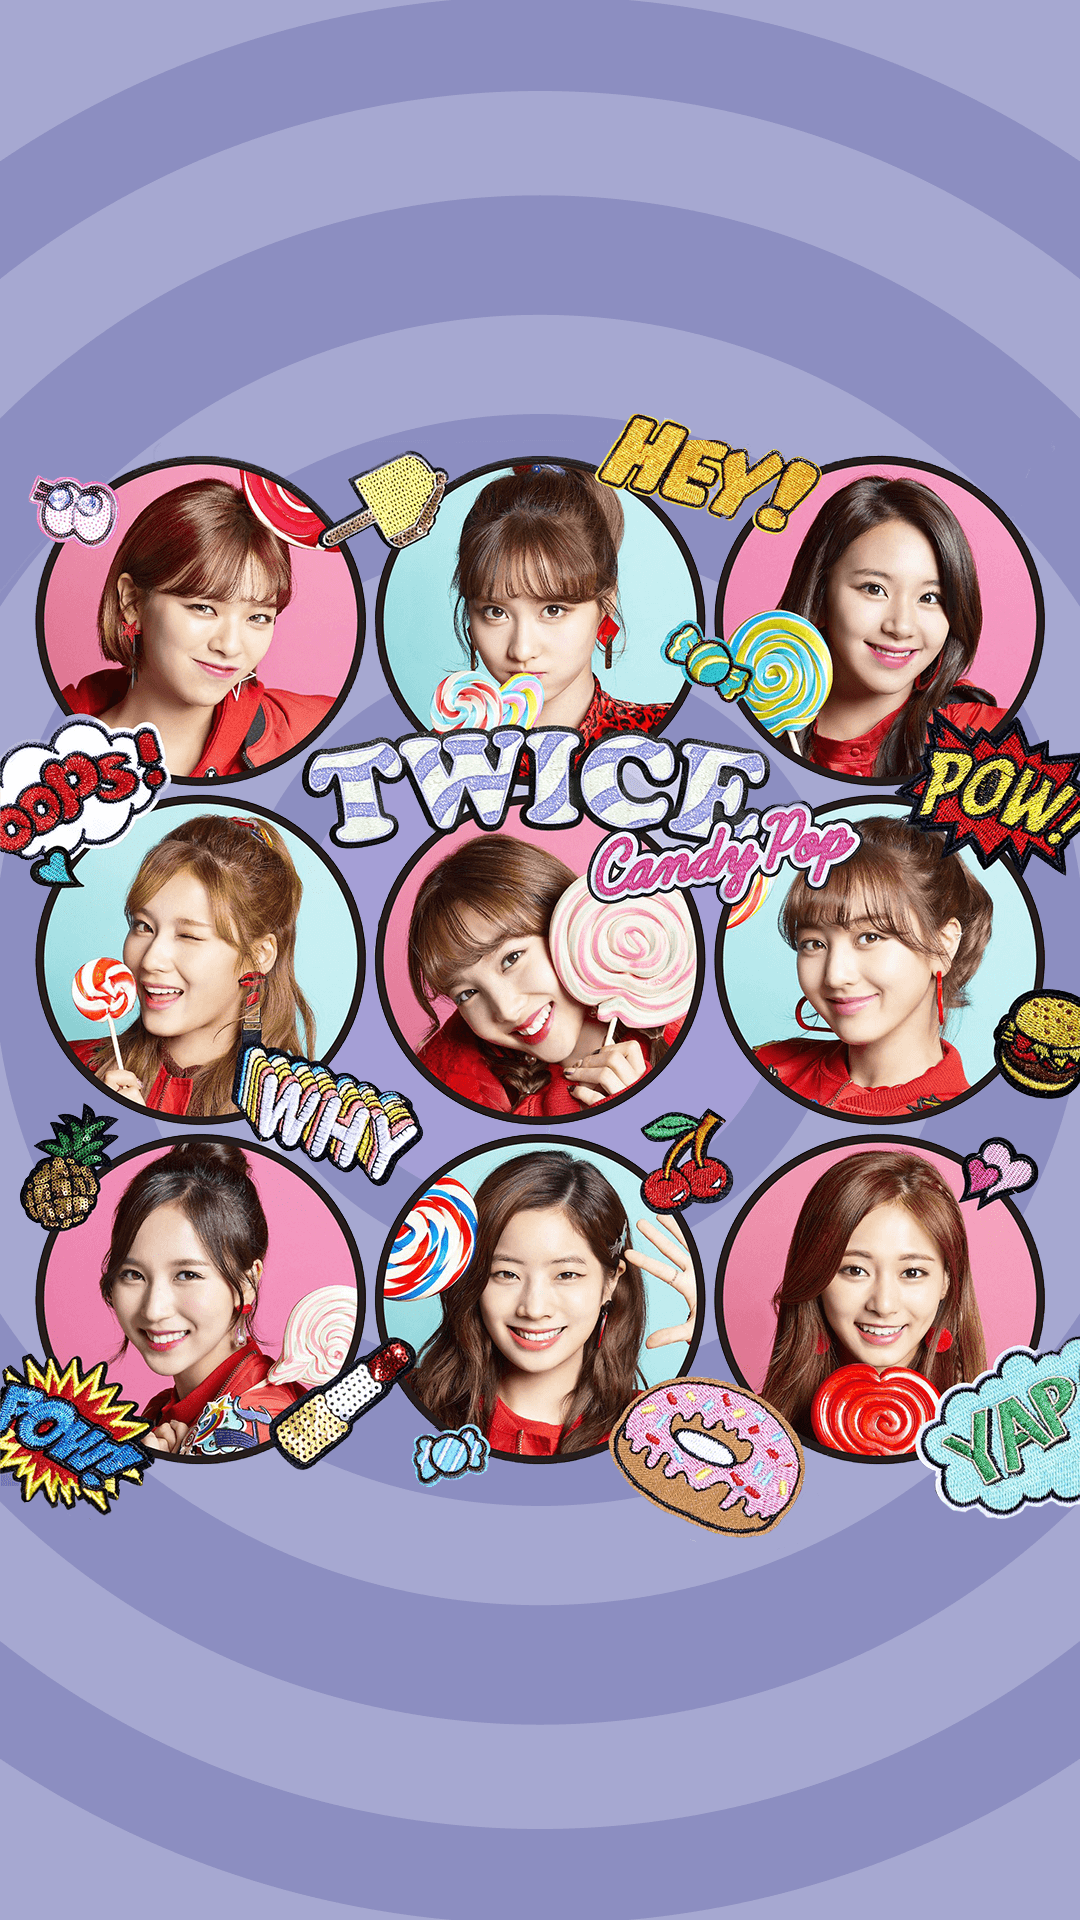 ♡ ONE IN A MILLION! ✦ The Official TWICE [트와이스] Thread